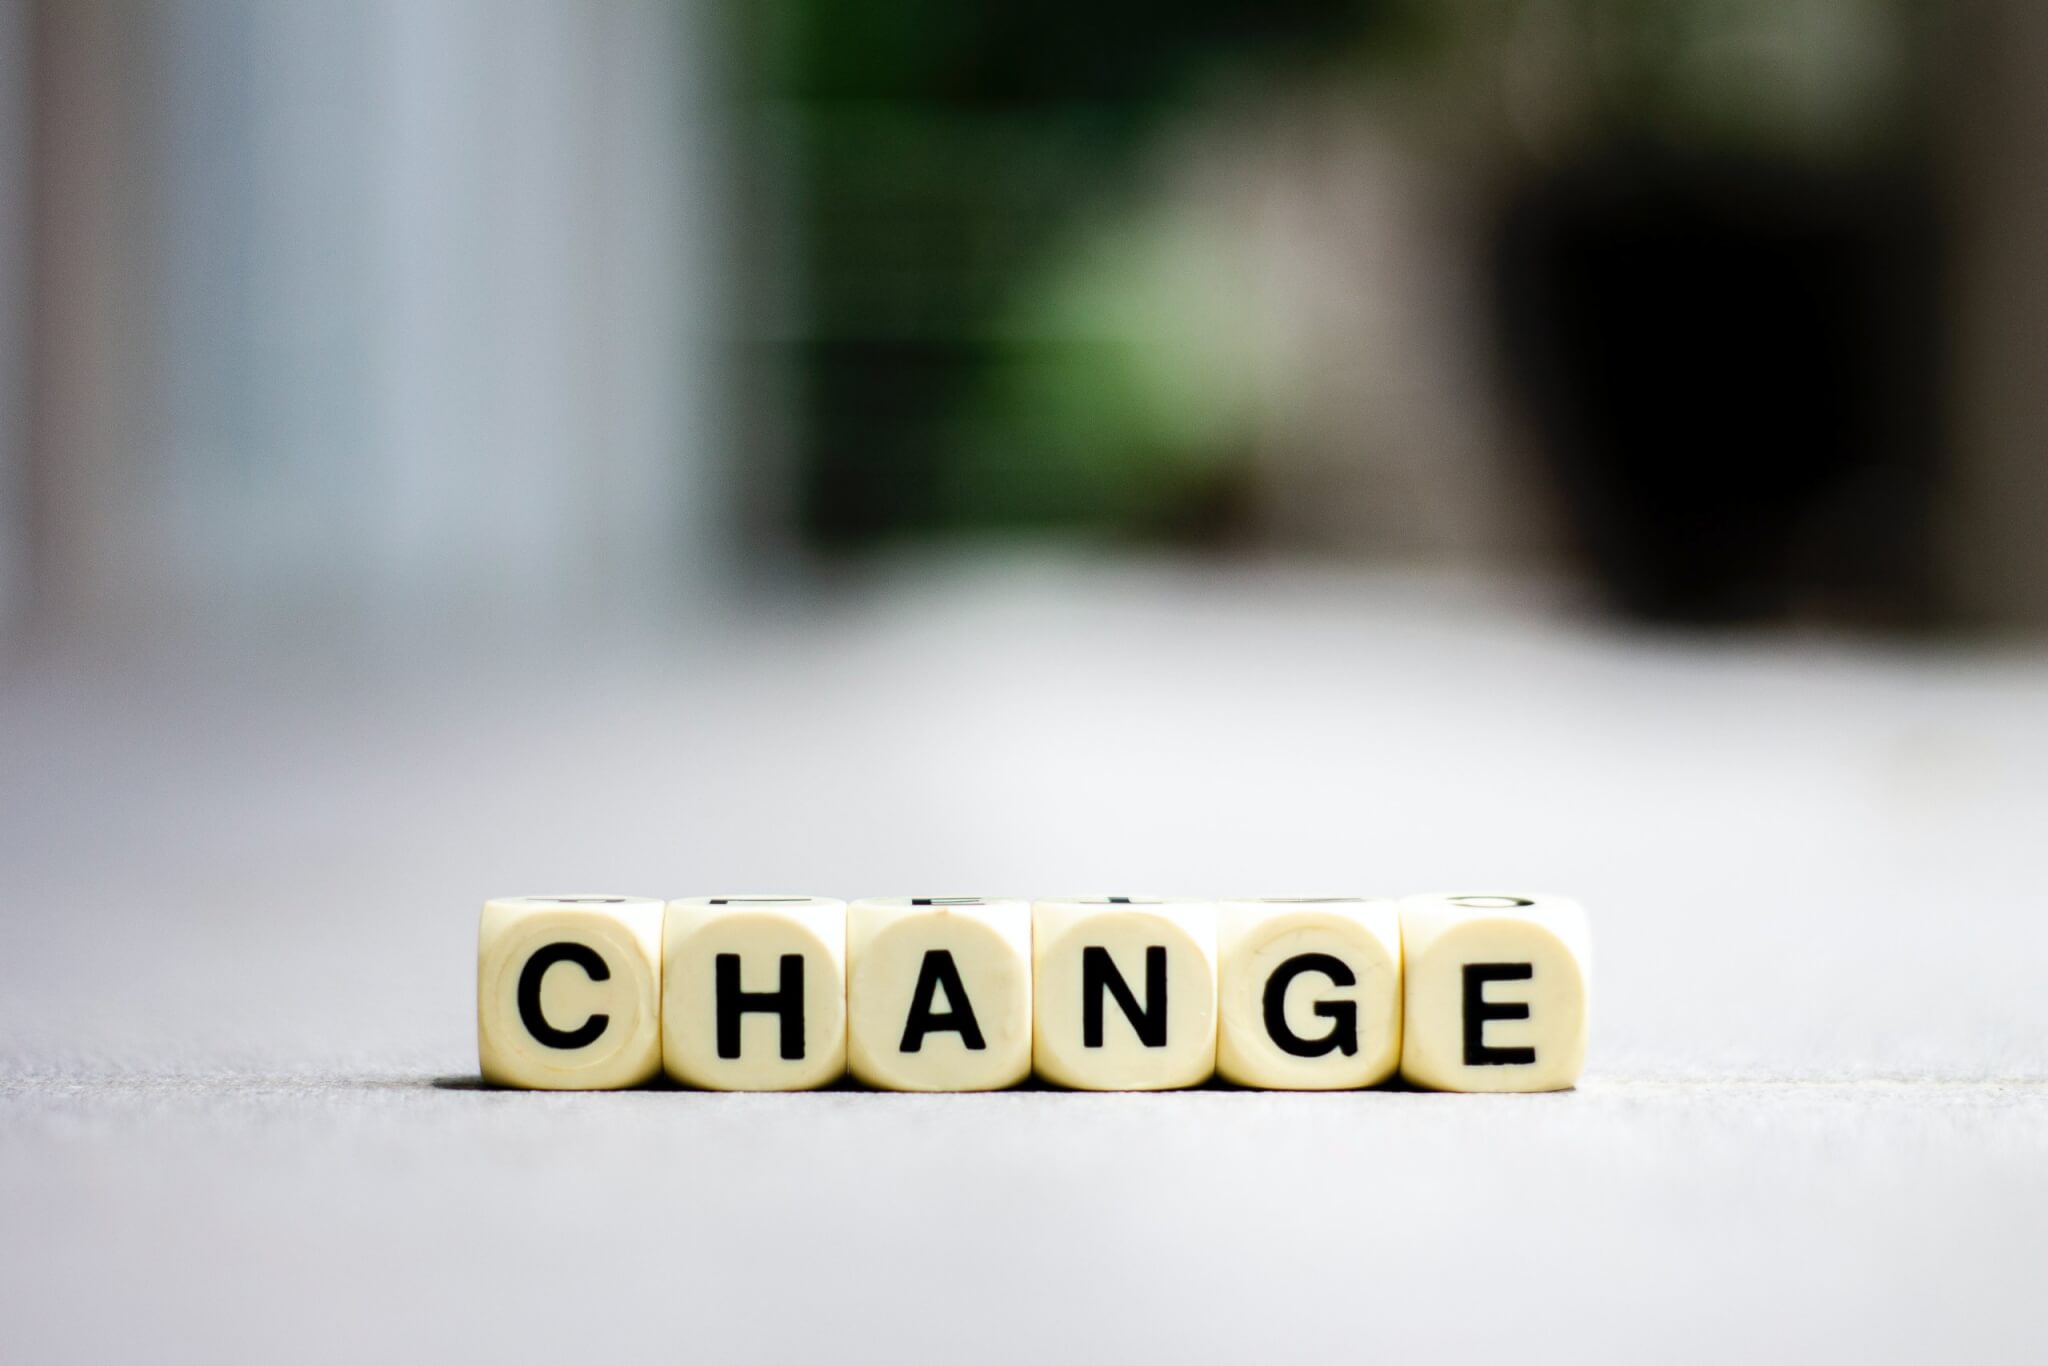 What is your one big change that cannot fail?